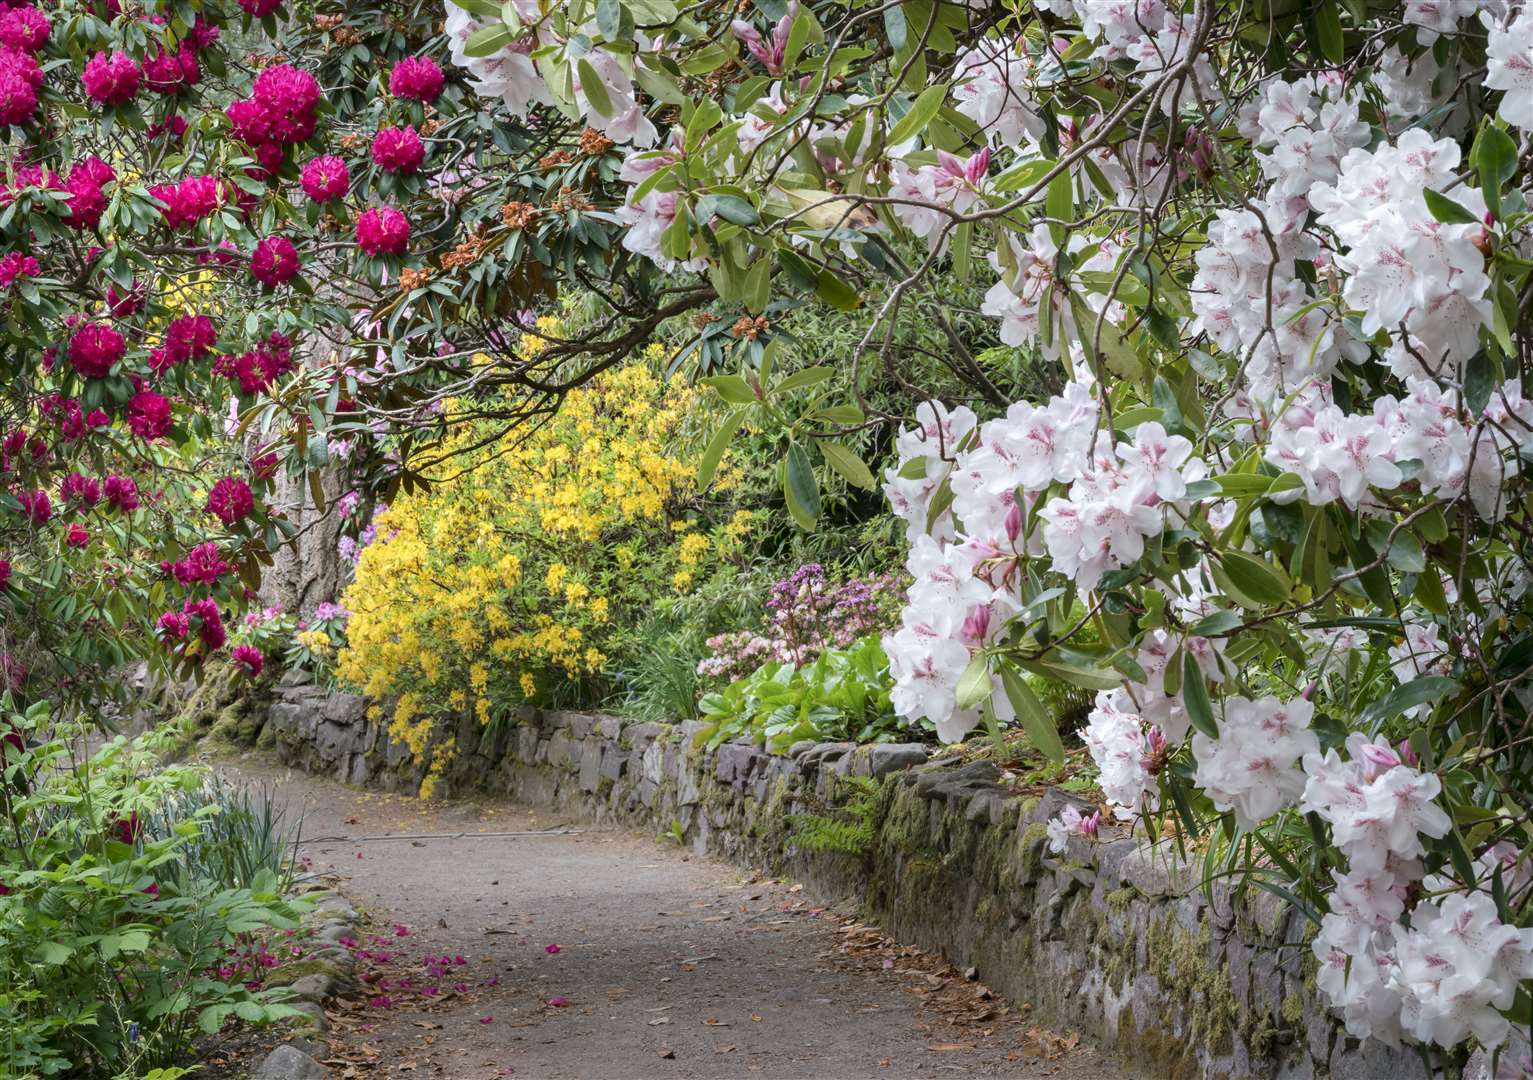 Inverewe has more than 400 varieties of rhododendron across the estate.